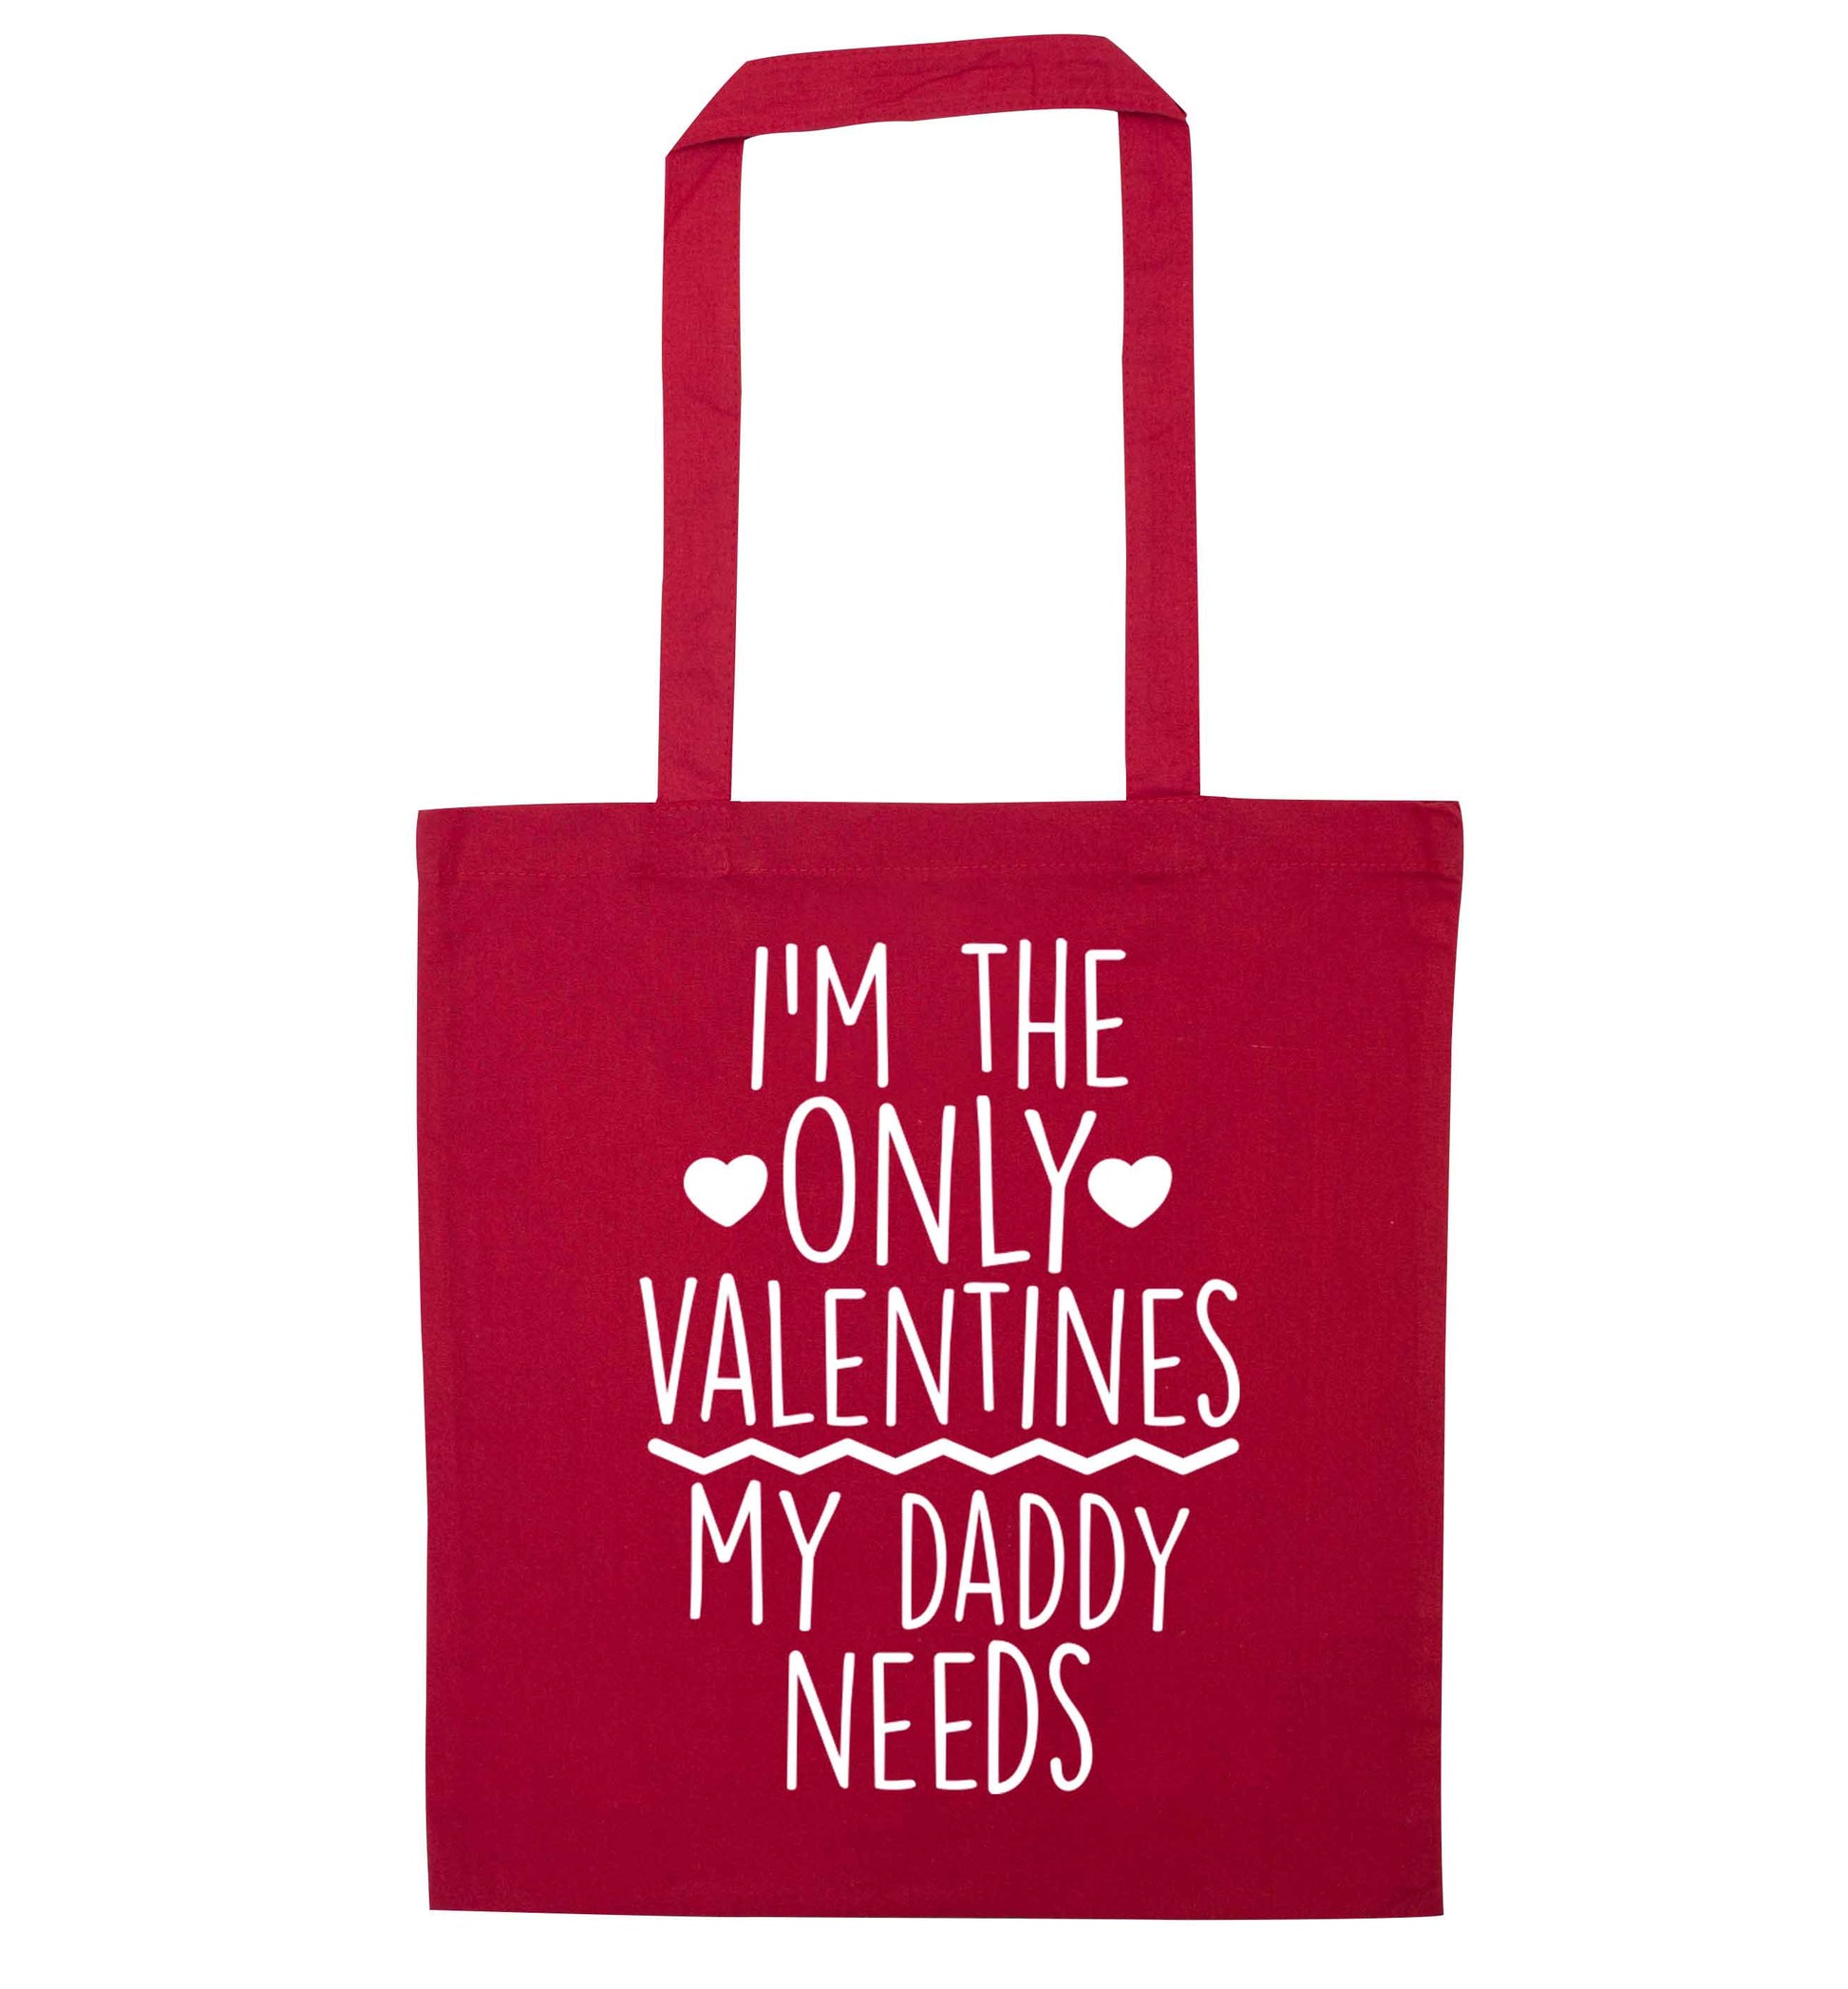 I'm the only valentines my daddy needs red tote bag